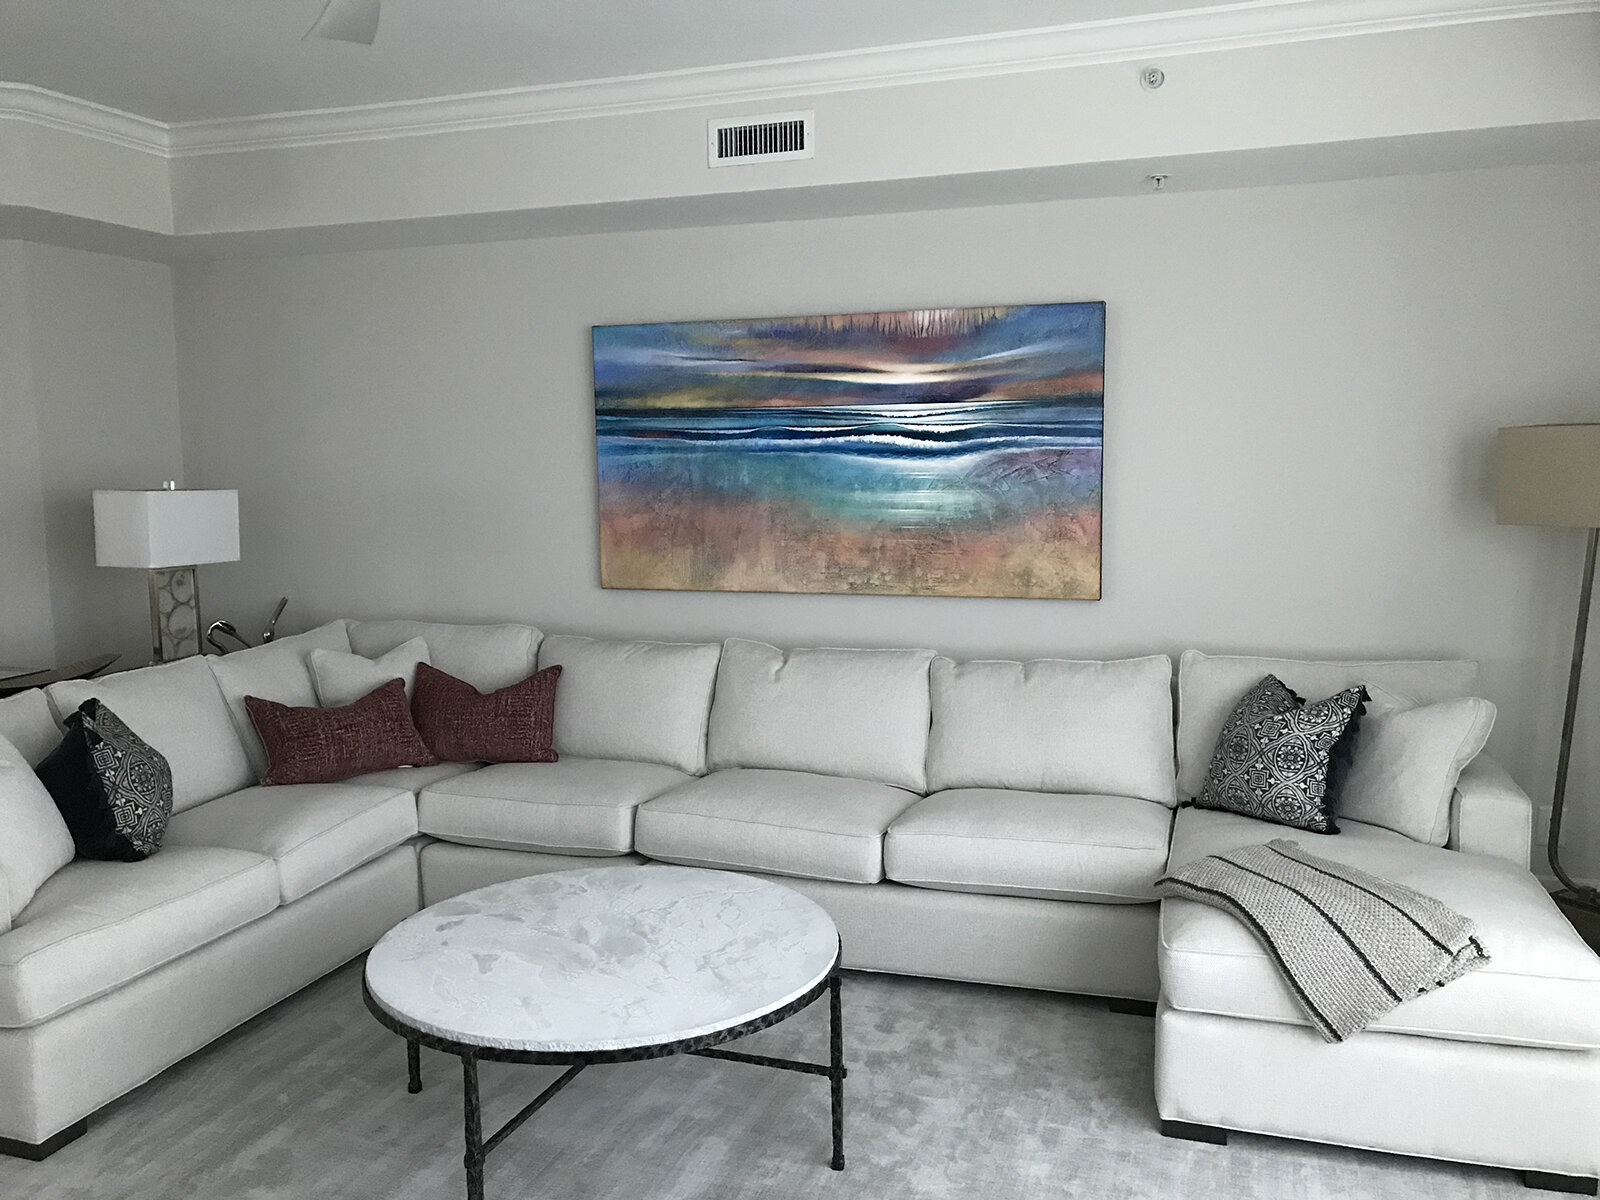 Large abstract artwork naples fl, large abstract paintings, Large abstract prints southwest fl, artist Tim Parker Art Naples FL 390.JPG